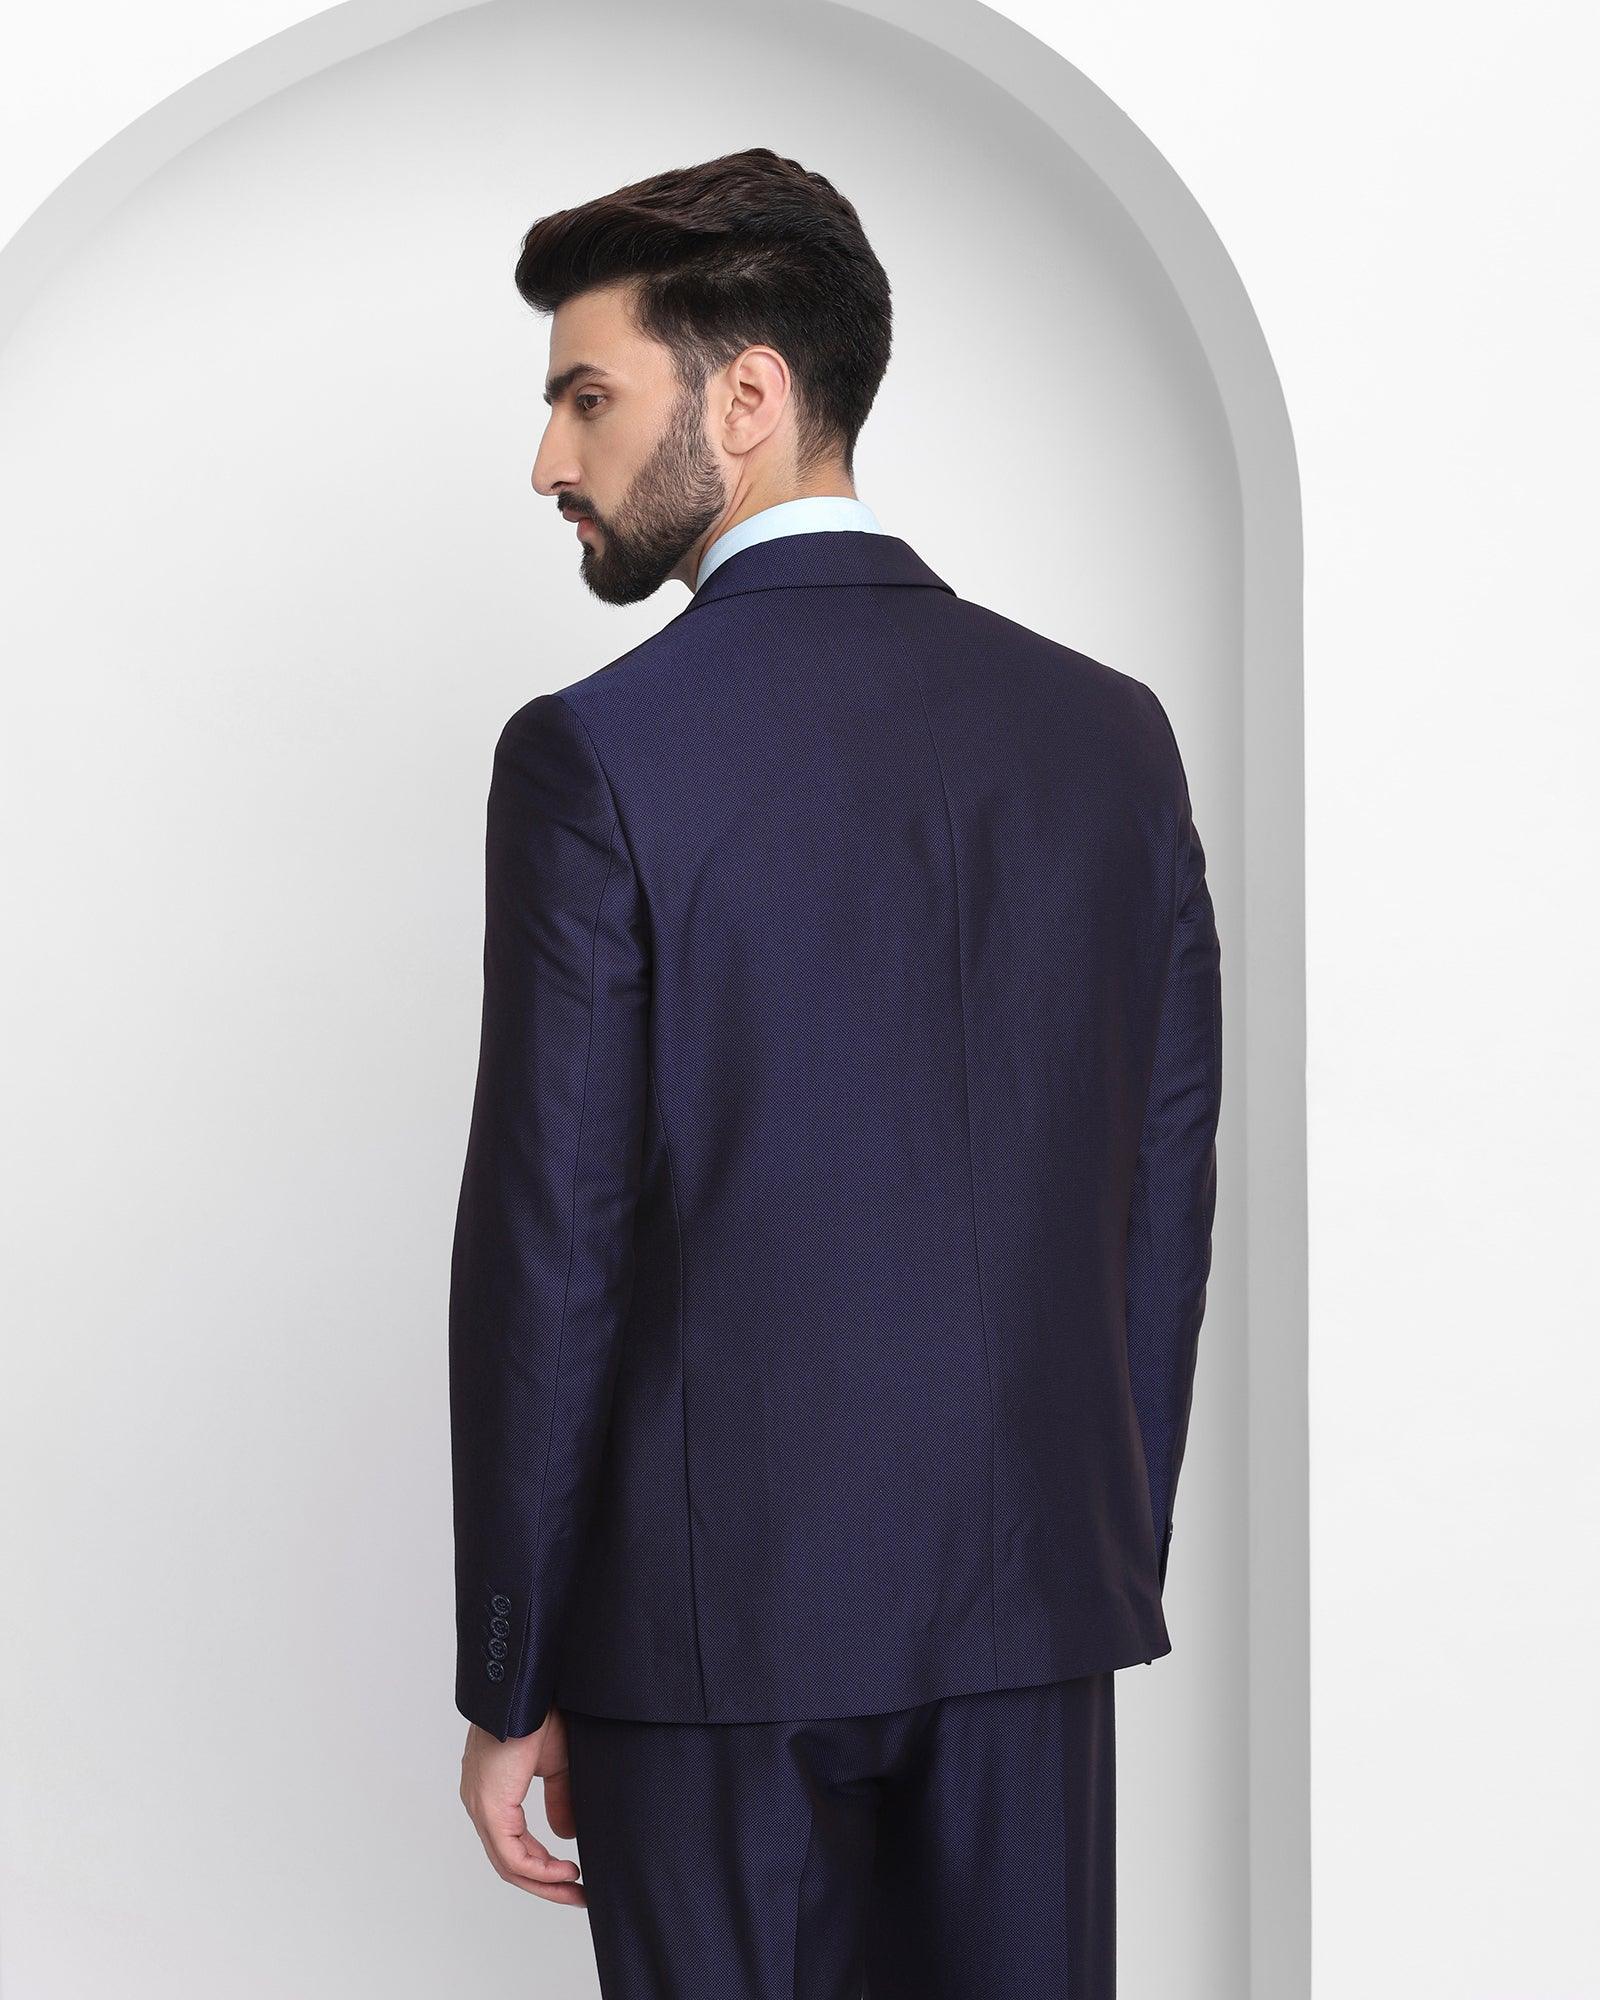 Louis Philippe - A dark blue jacquard tuxedo suit with